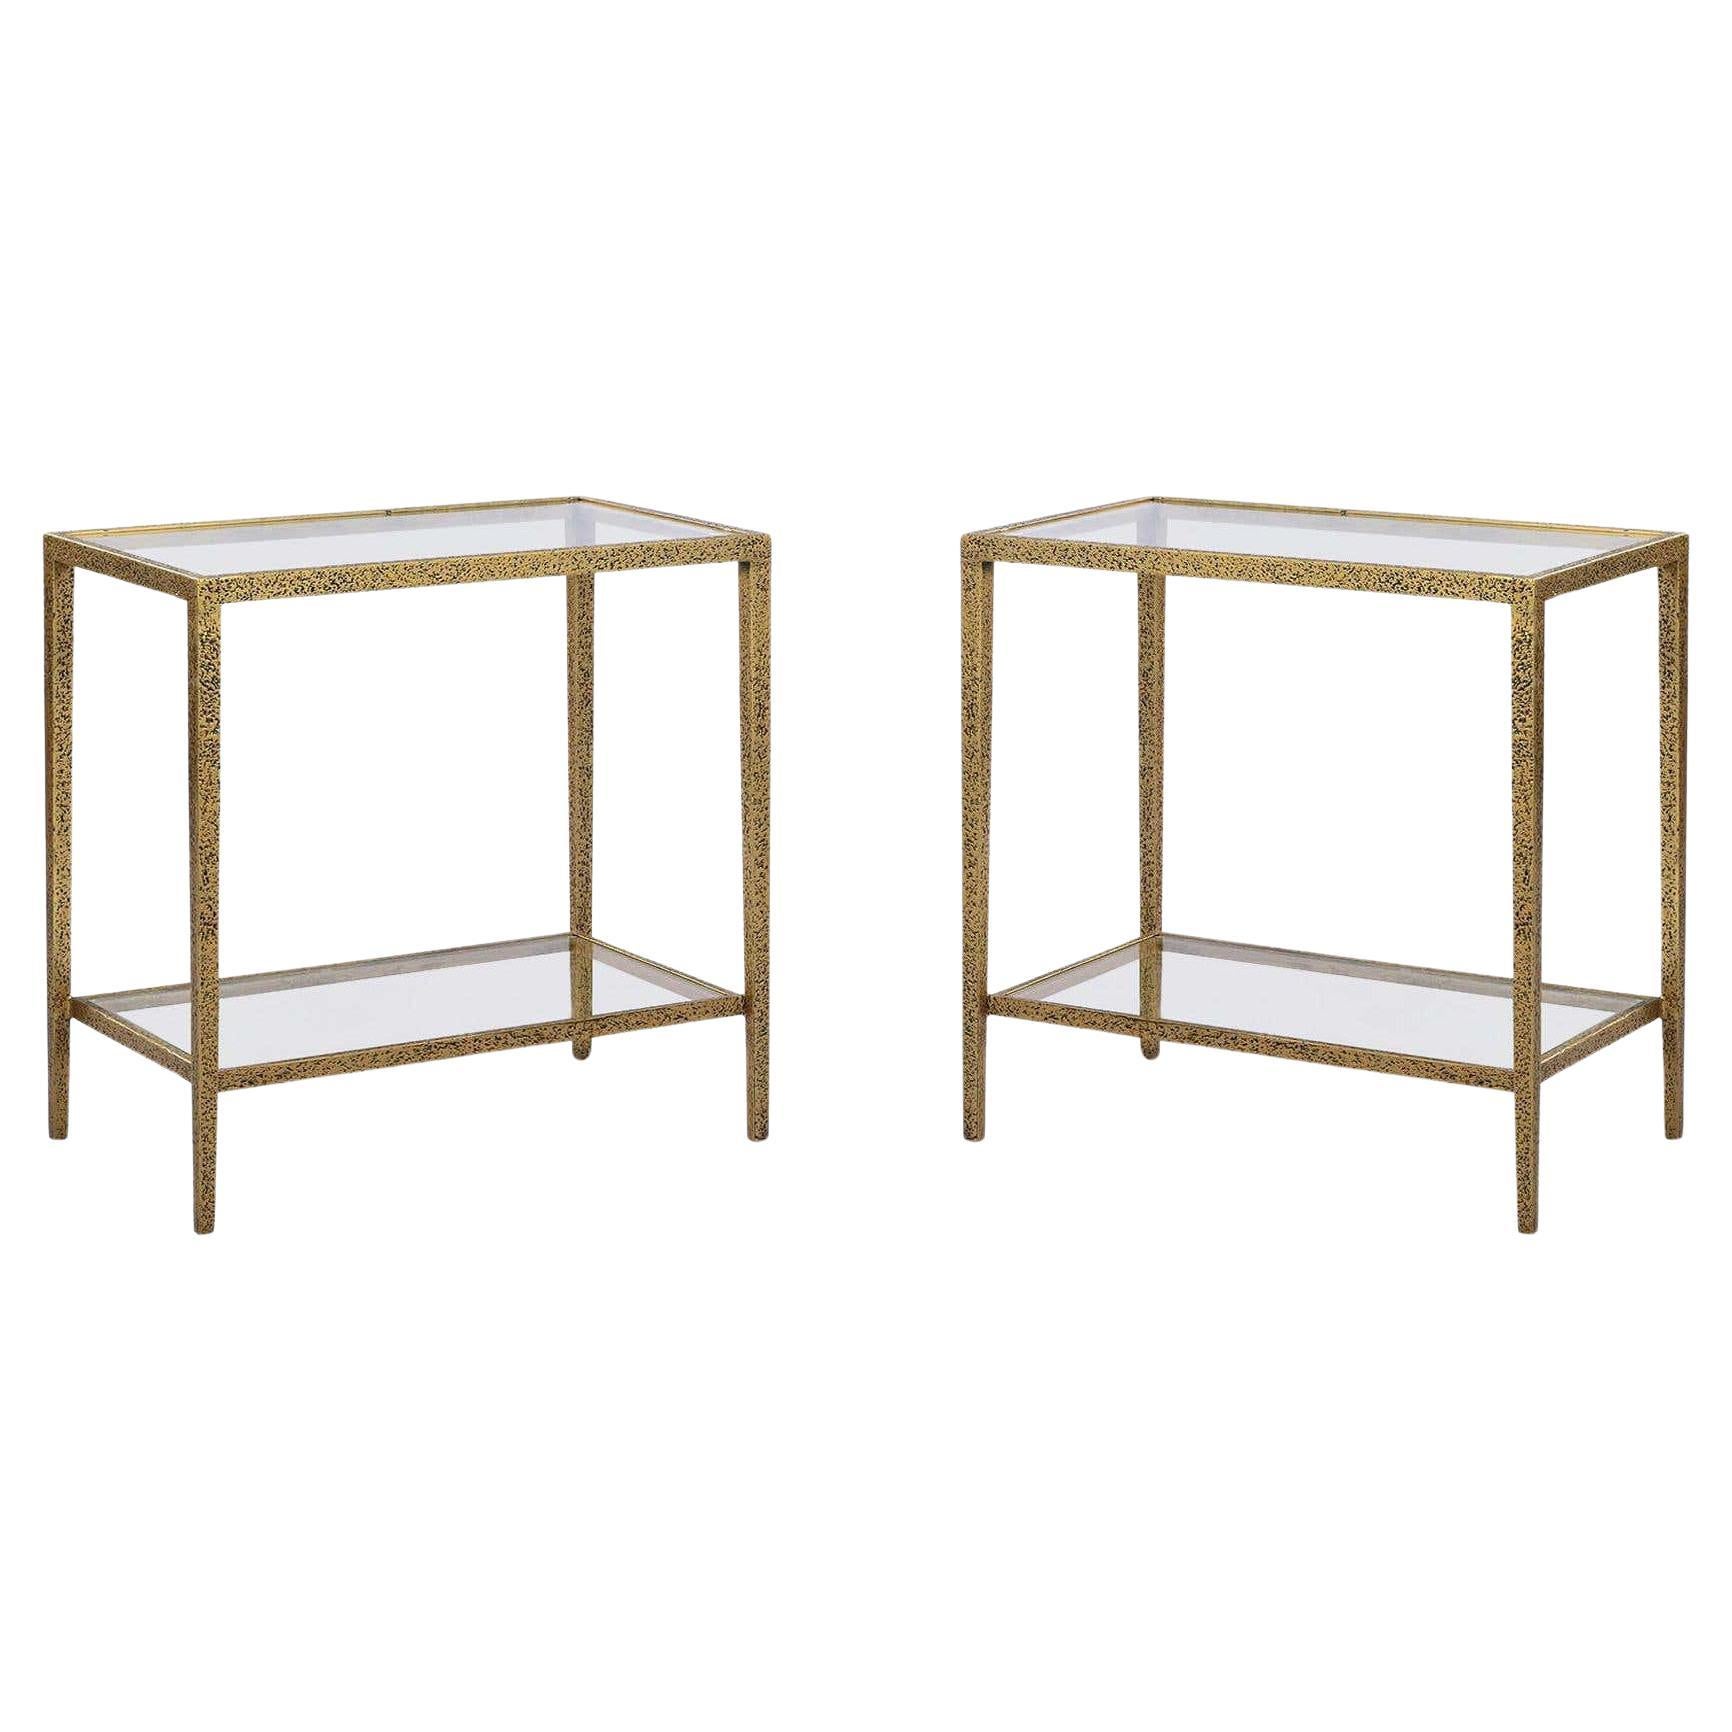 Pair of Modern Hammered Rectangular Side Tables